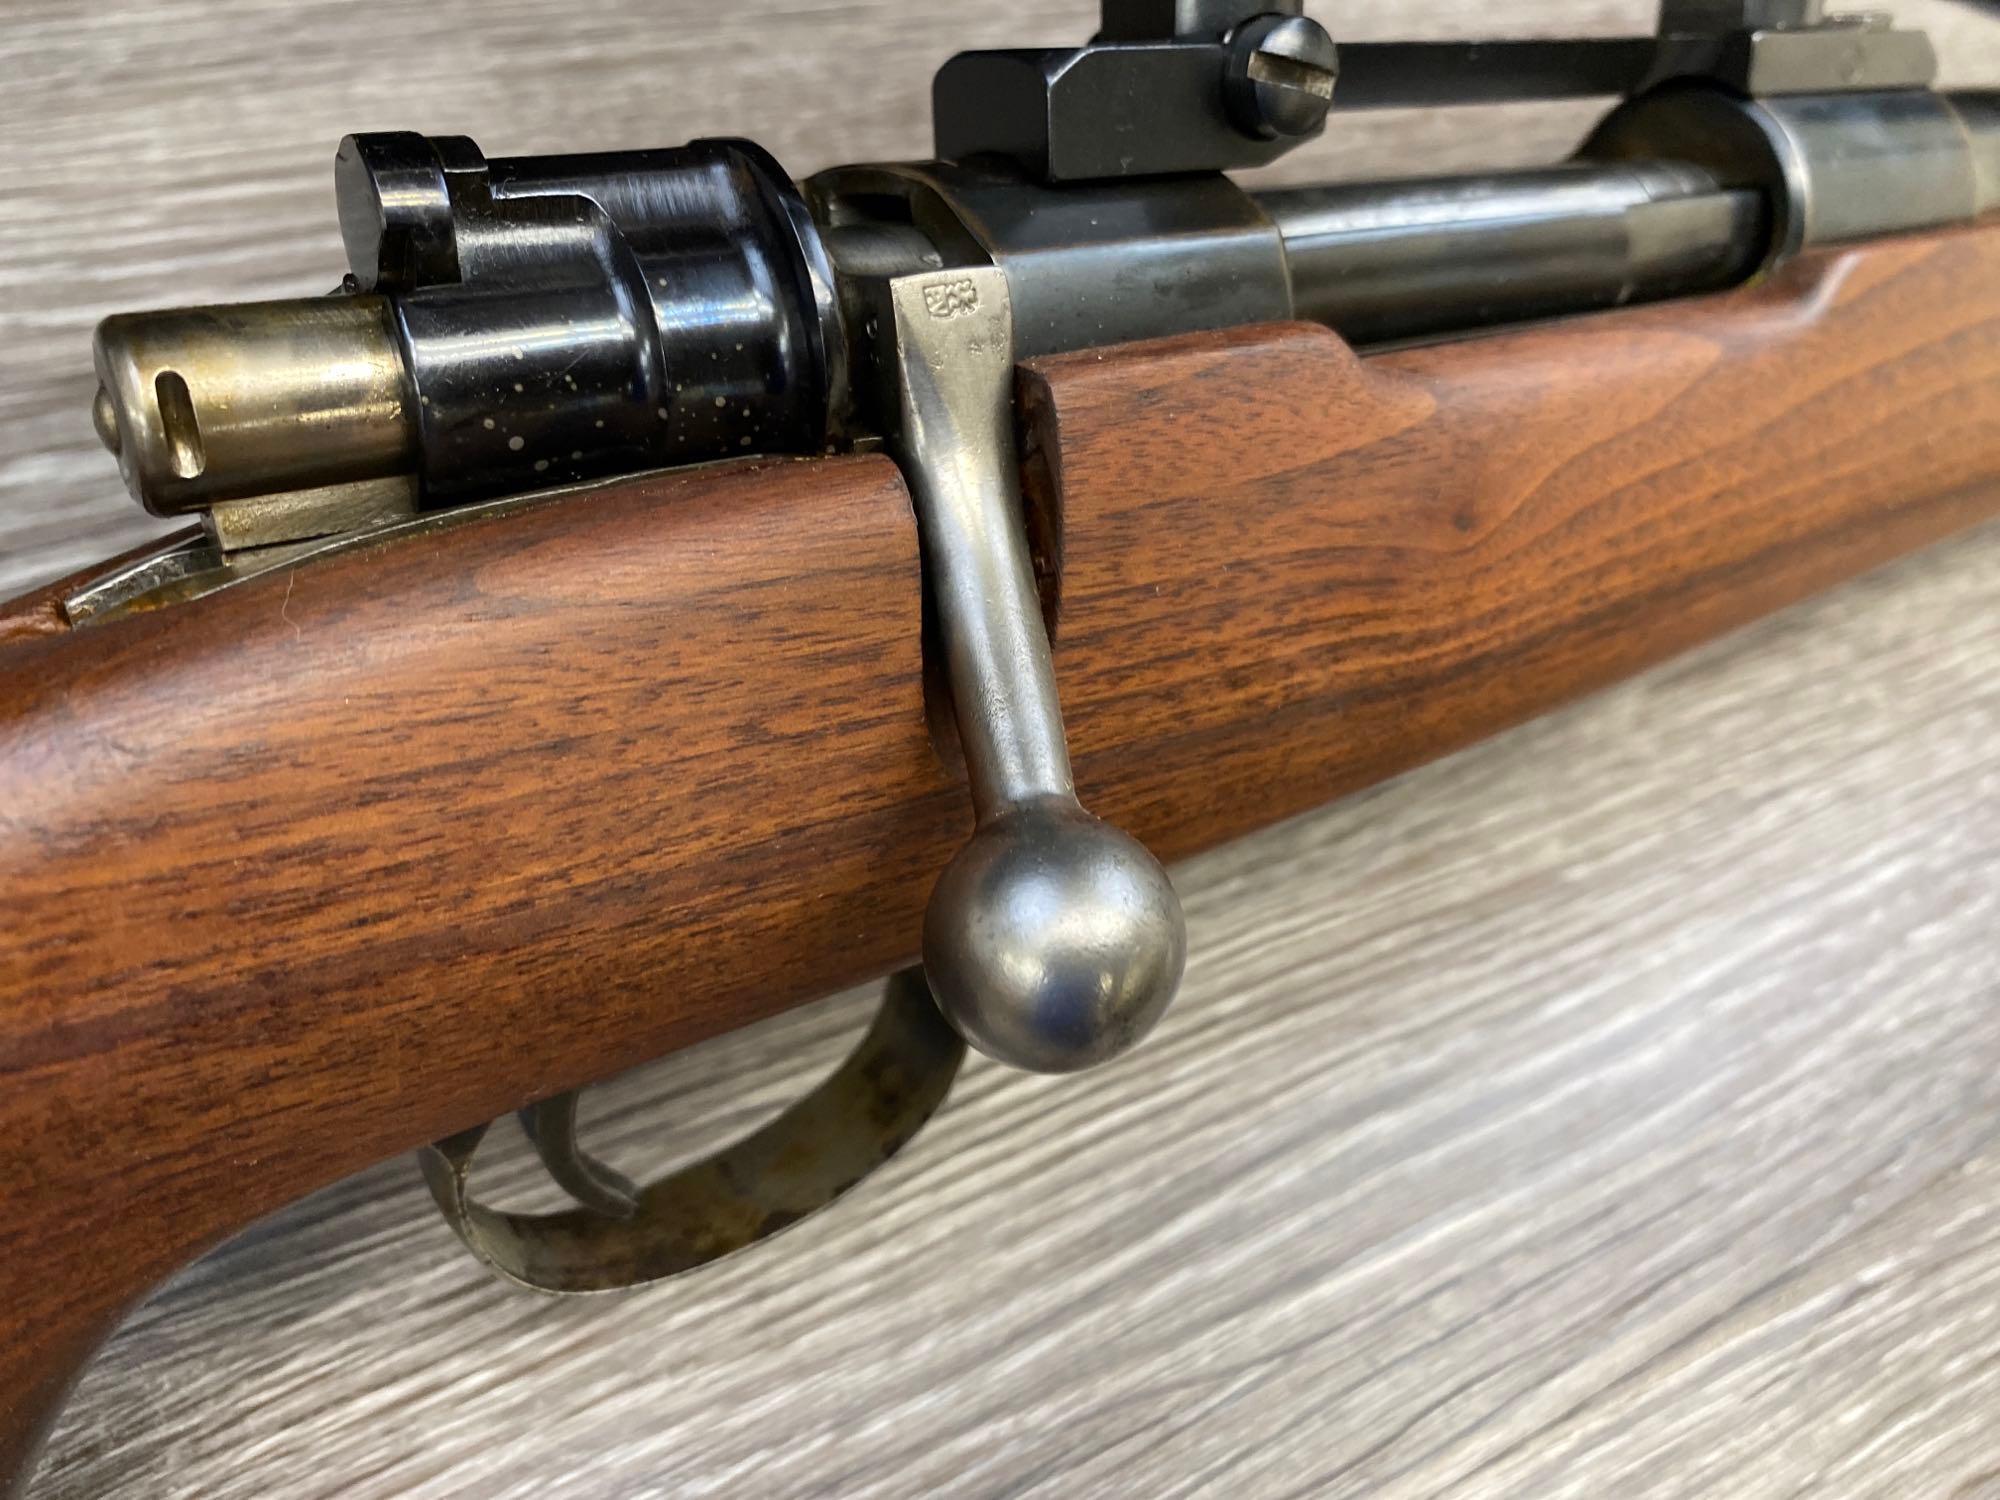 CUSTOM FN COMMERCIAL MAUSER BOLT ACTION 7mm-08 CAL RIFLE W/ SCOPE